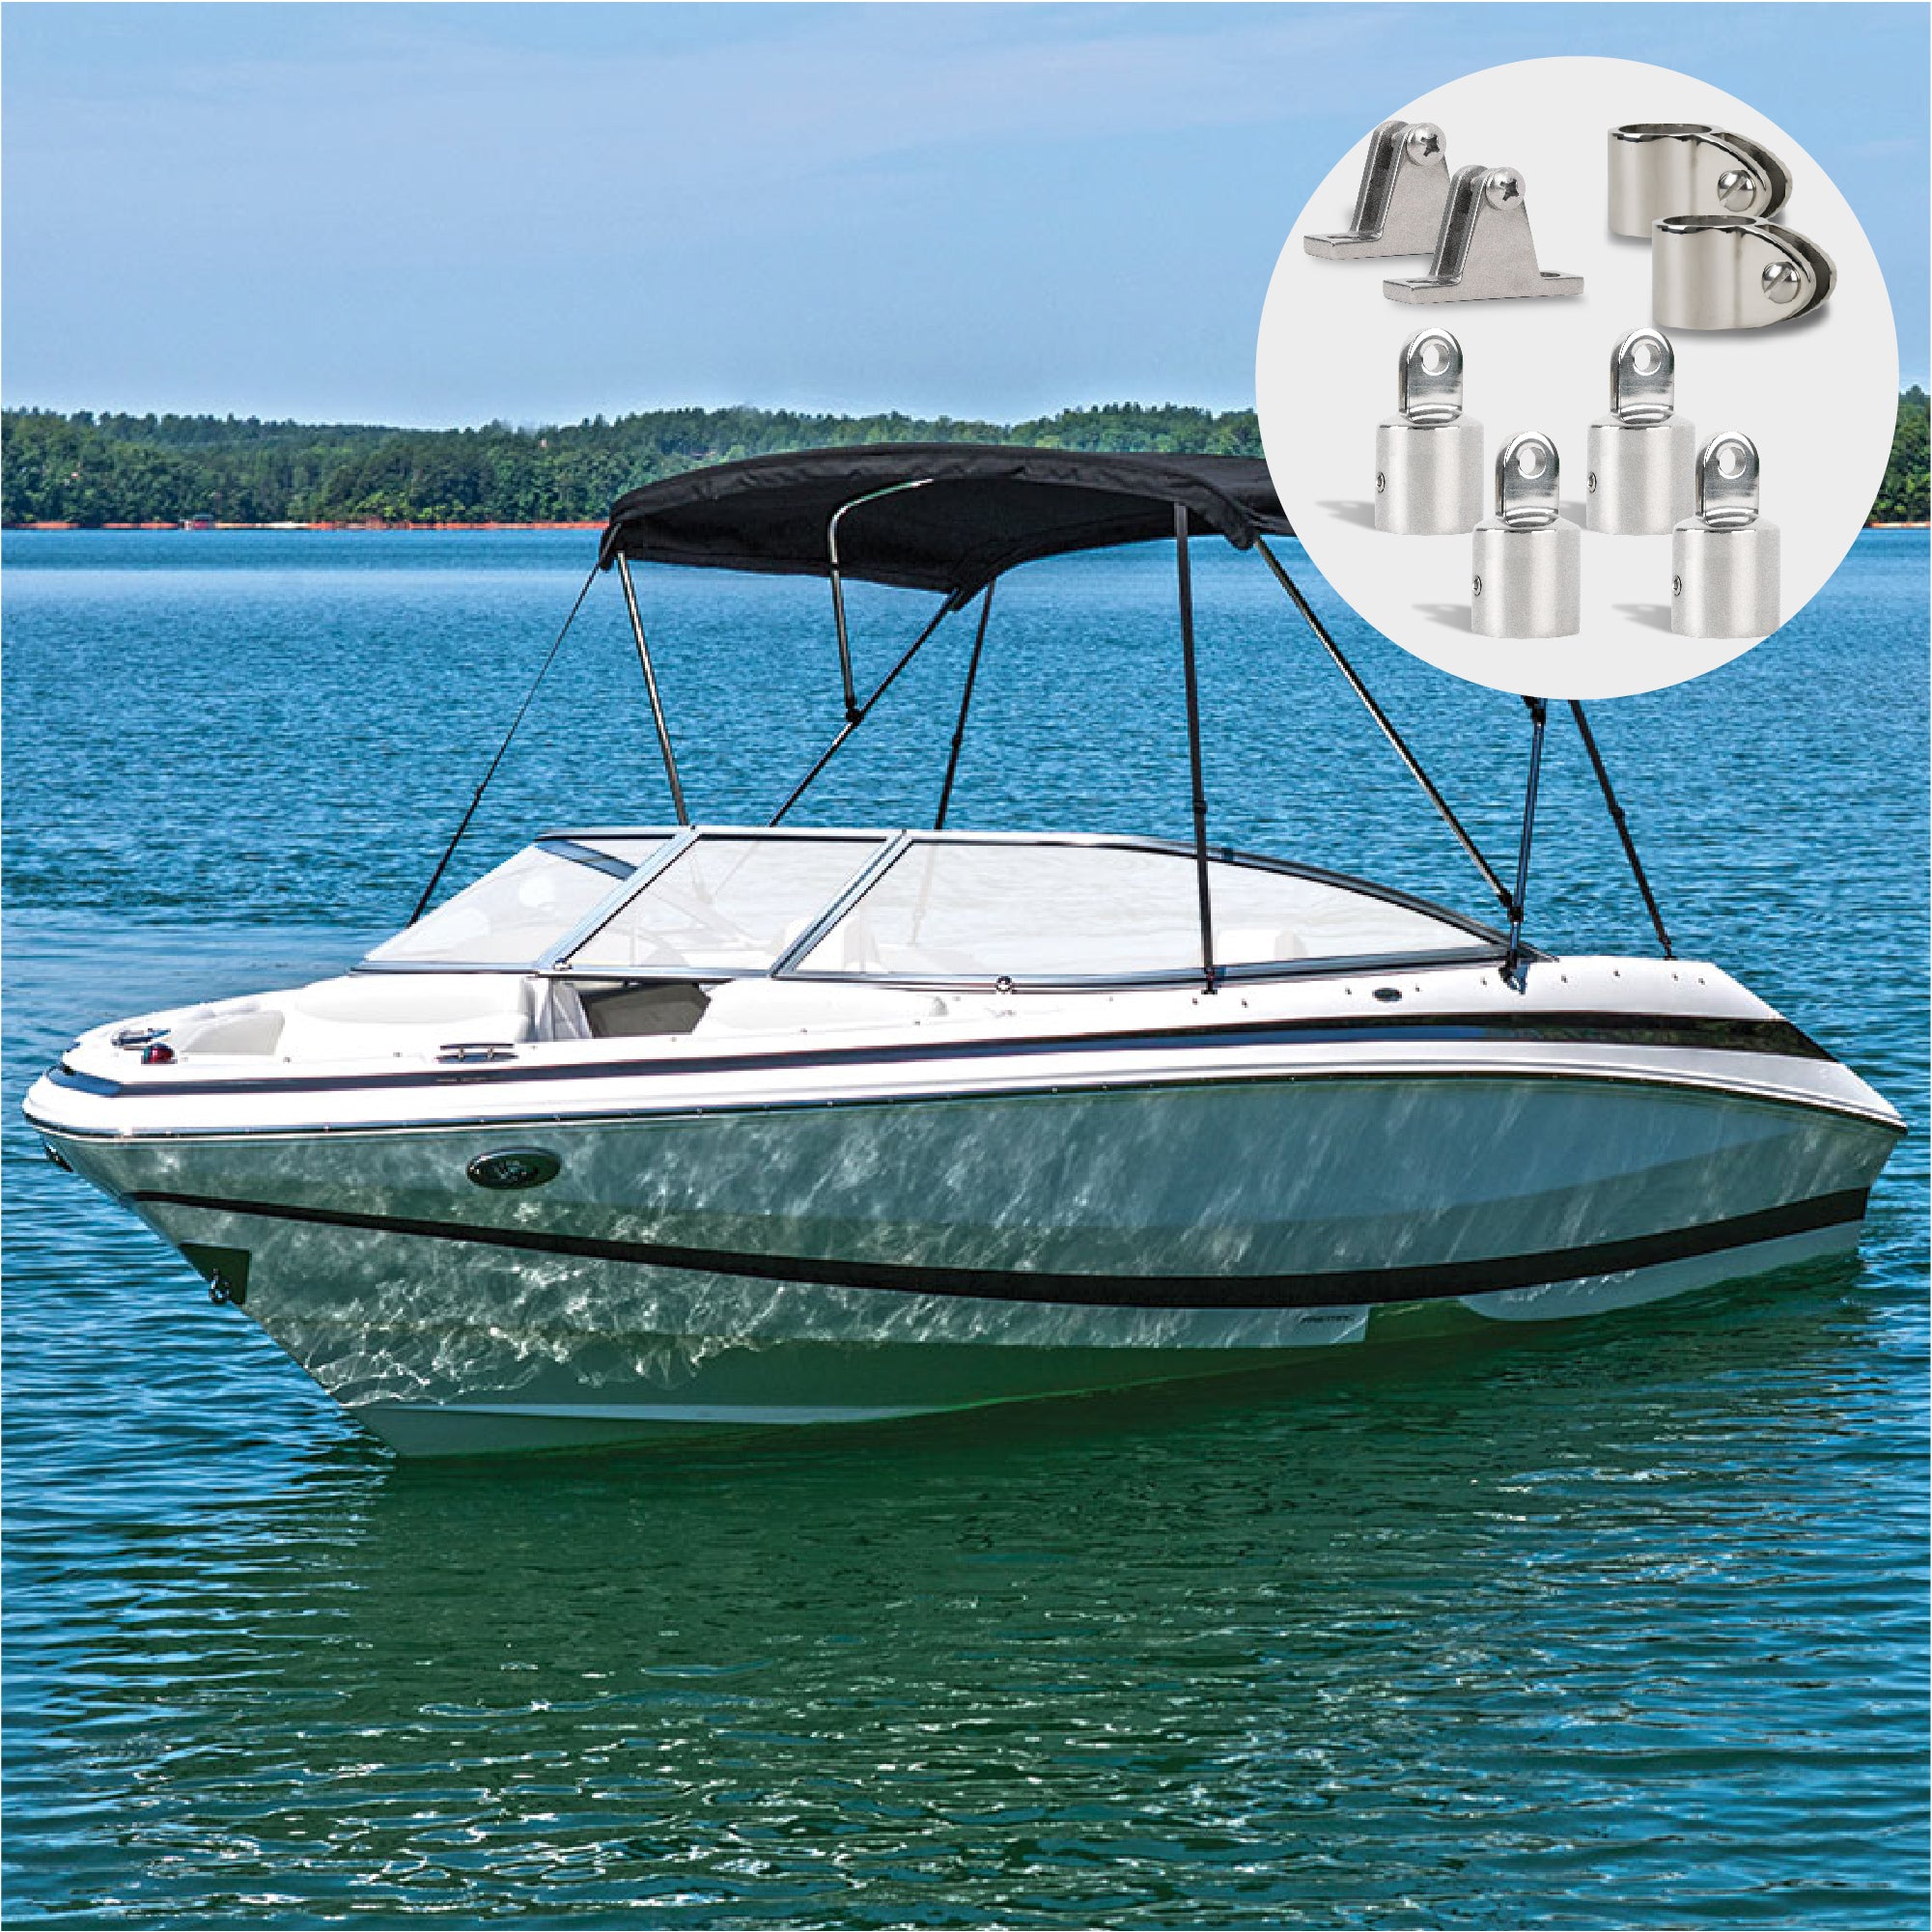 2 Bow Bimini Top Set 8 Piece, 1" AISI316 Stainless Steel - FO367-C4